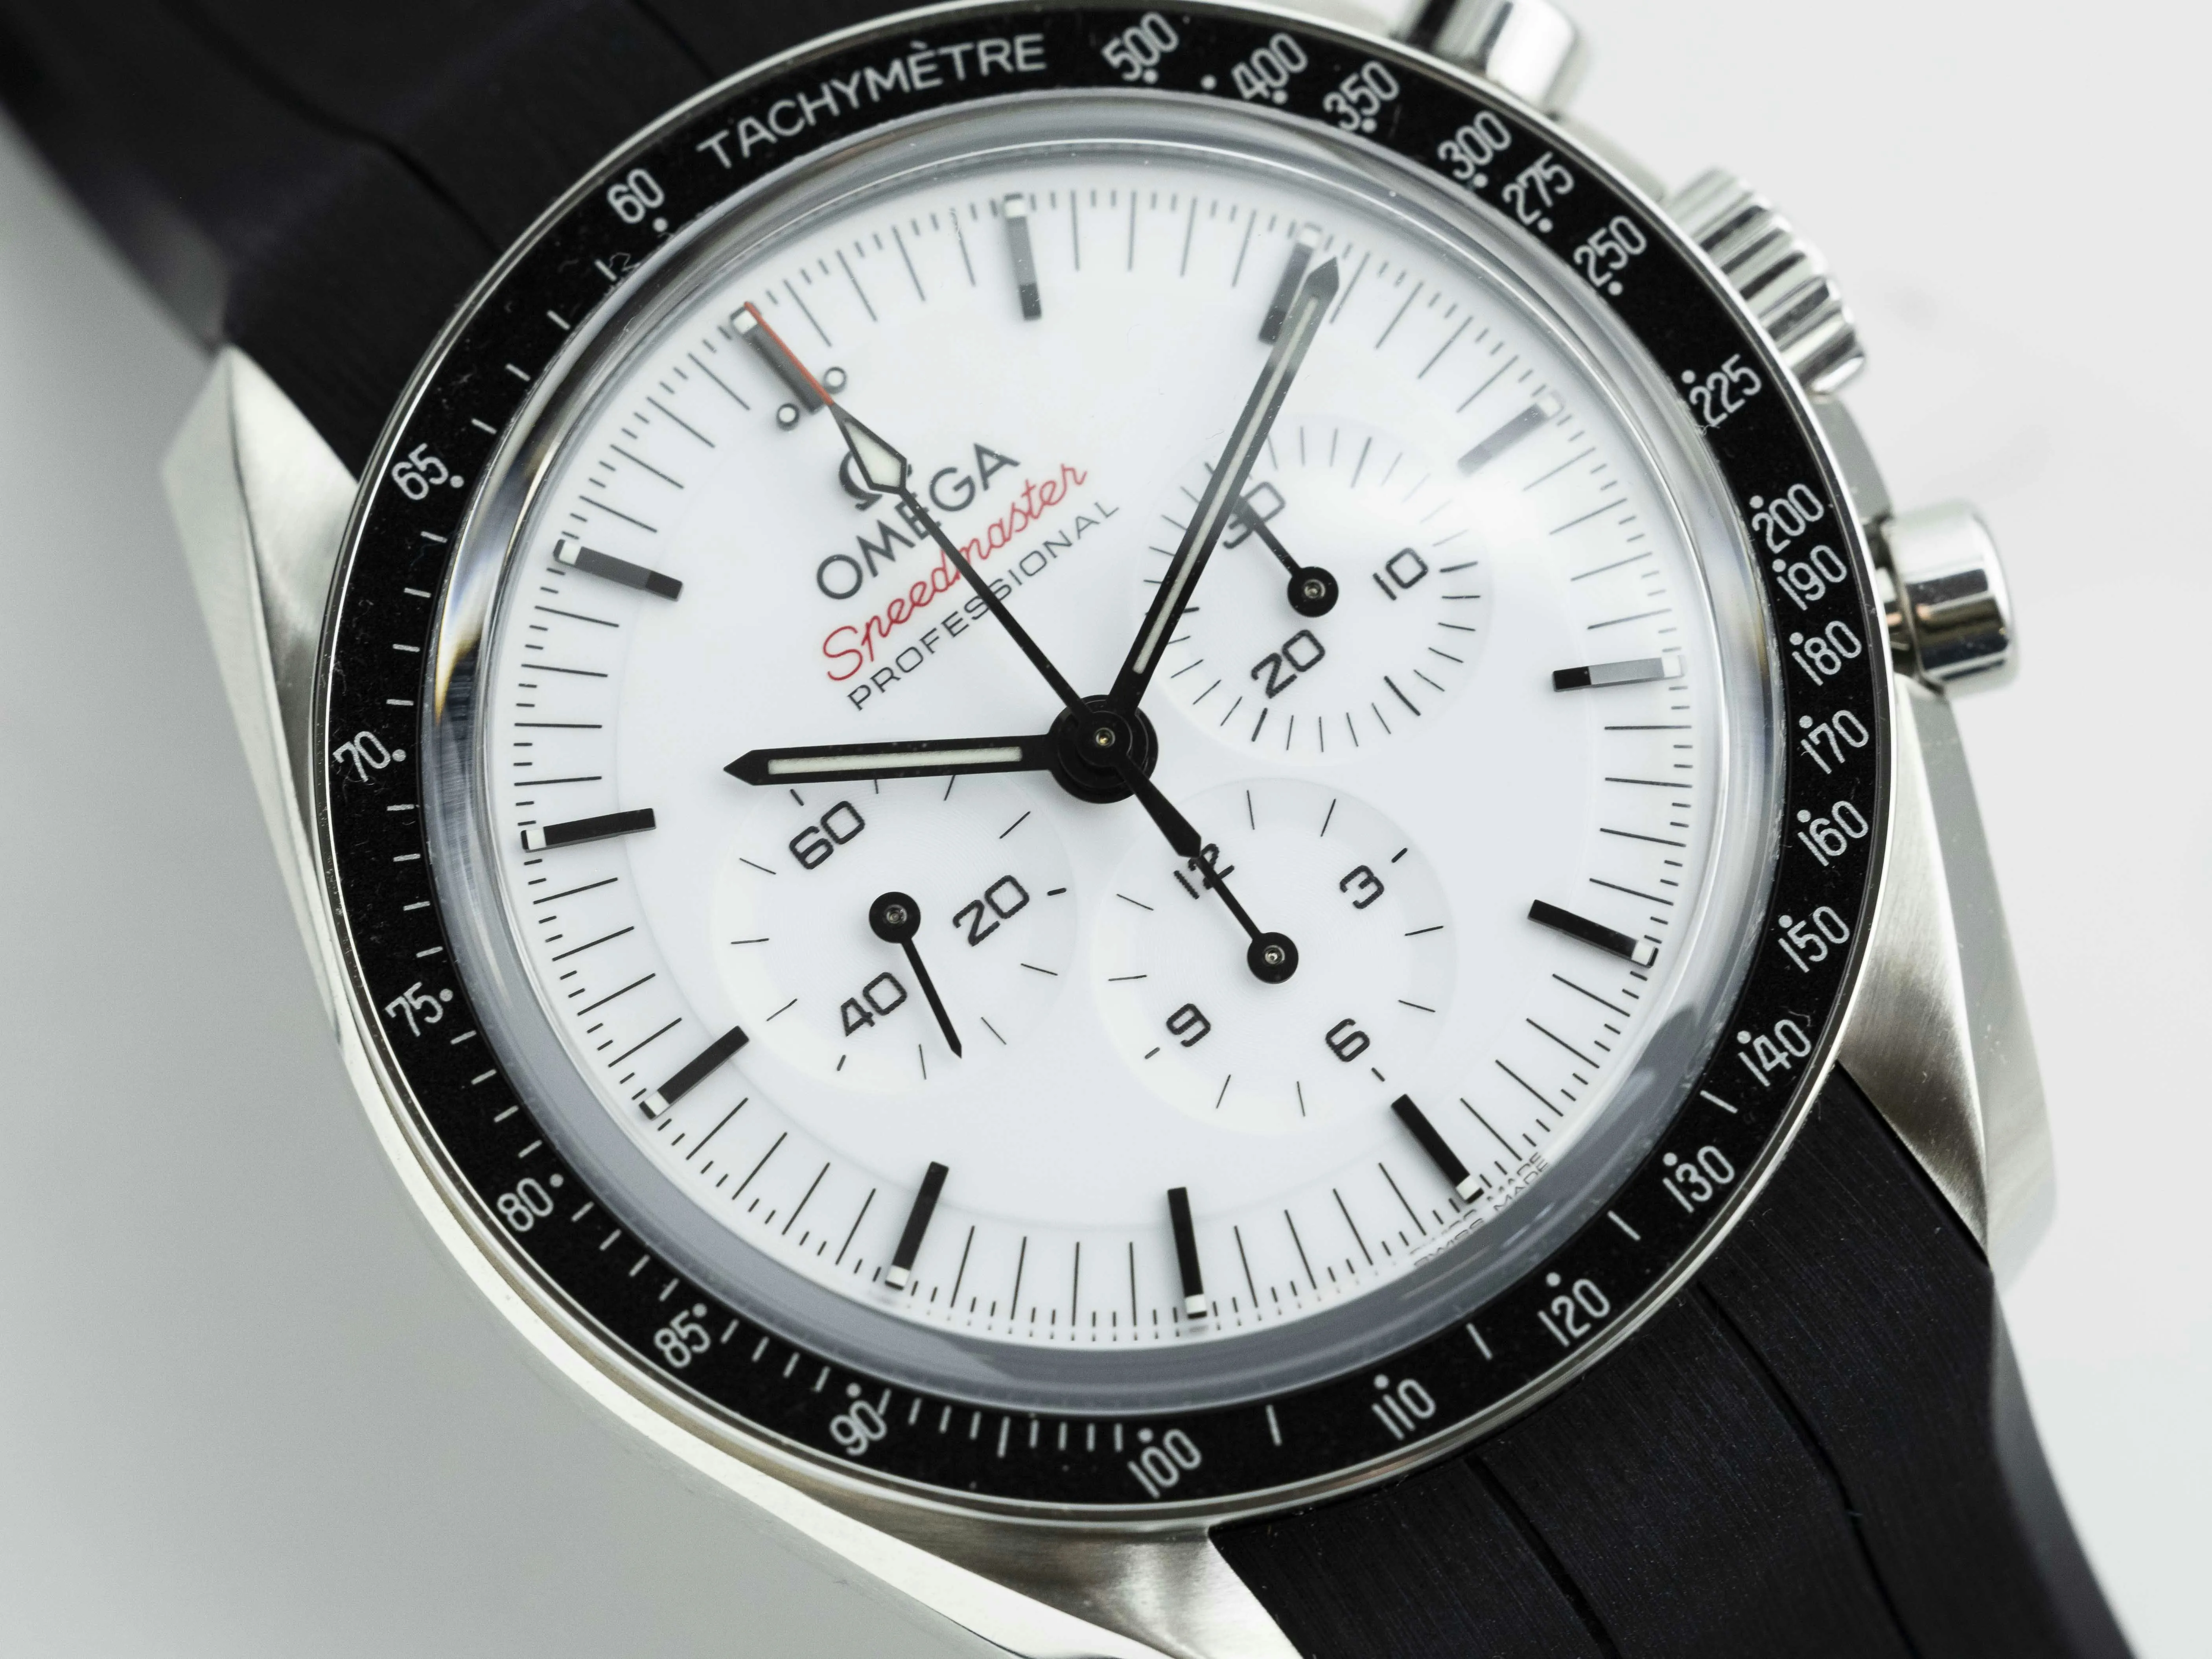 Omega Speedmaster Professional Moonwatch 310.32.42.50.04.001 42mm Stainless steel White 5